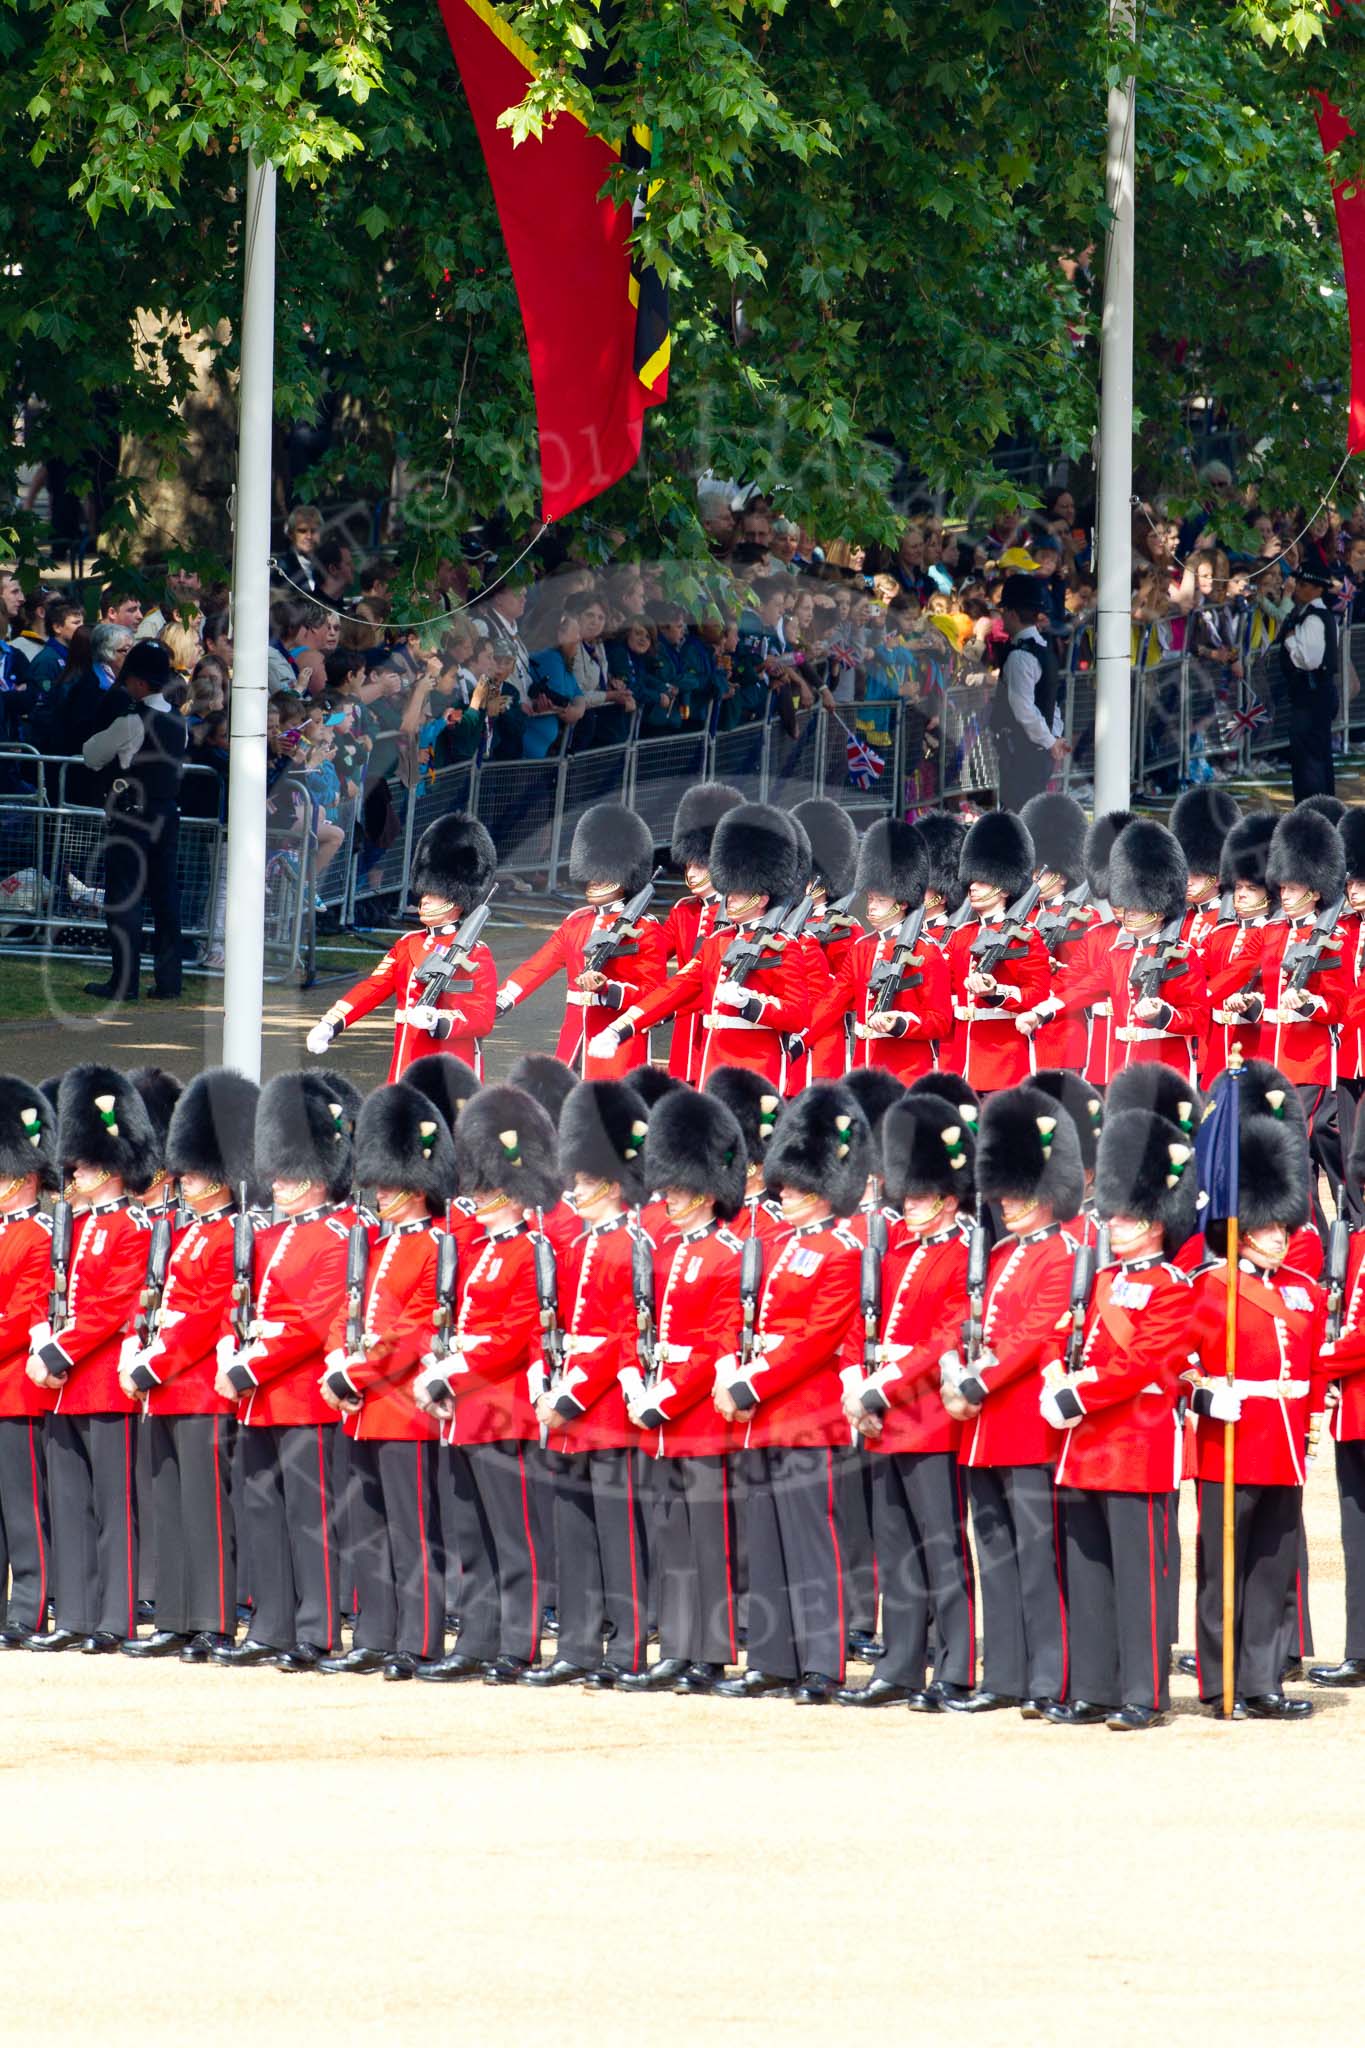 The Colonel's Review 2011: No. 1 Guard, 1st Battalion Scots Guards, the Escort for the Colour, marching onto Horse Guards Parade. In the foreground No. 5 Guard, 1st Battalion Welsh Guards..
Horse Guards Parade, Westminster,
London SW1,

United Kingdom,
on 04 June 2011 at 10:30, image #35